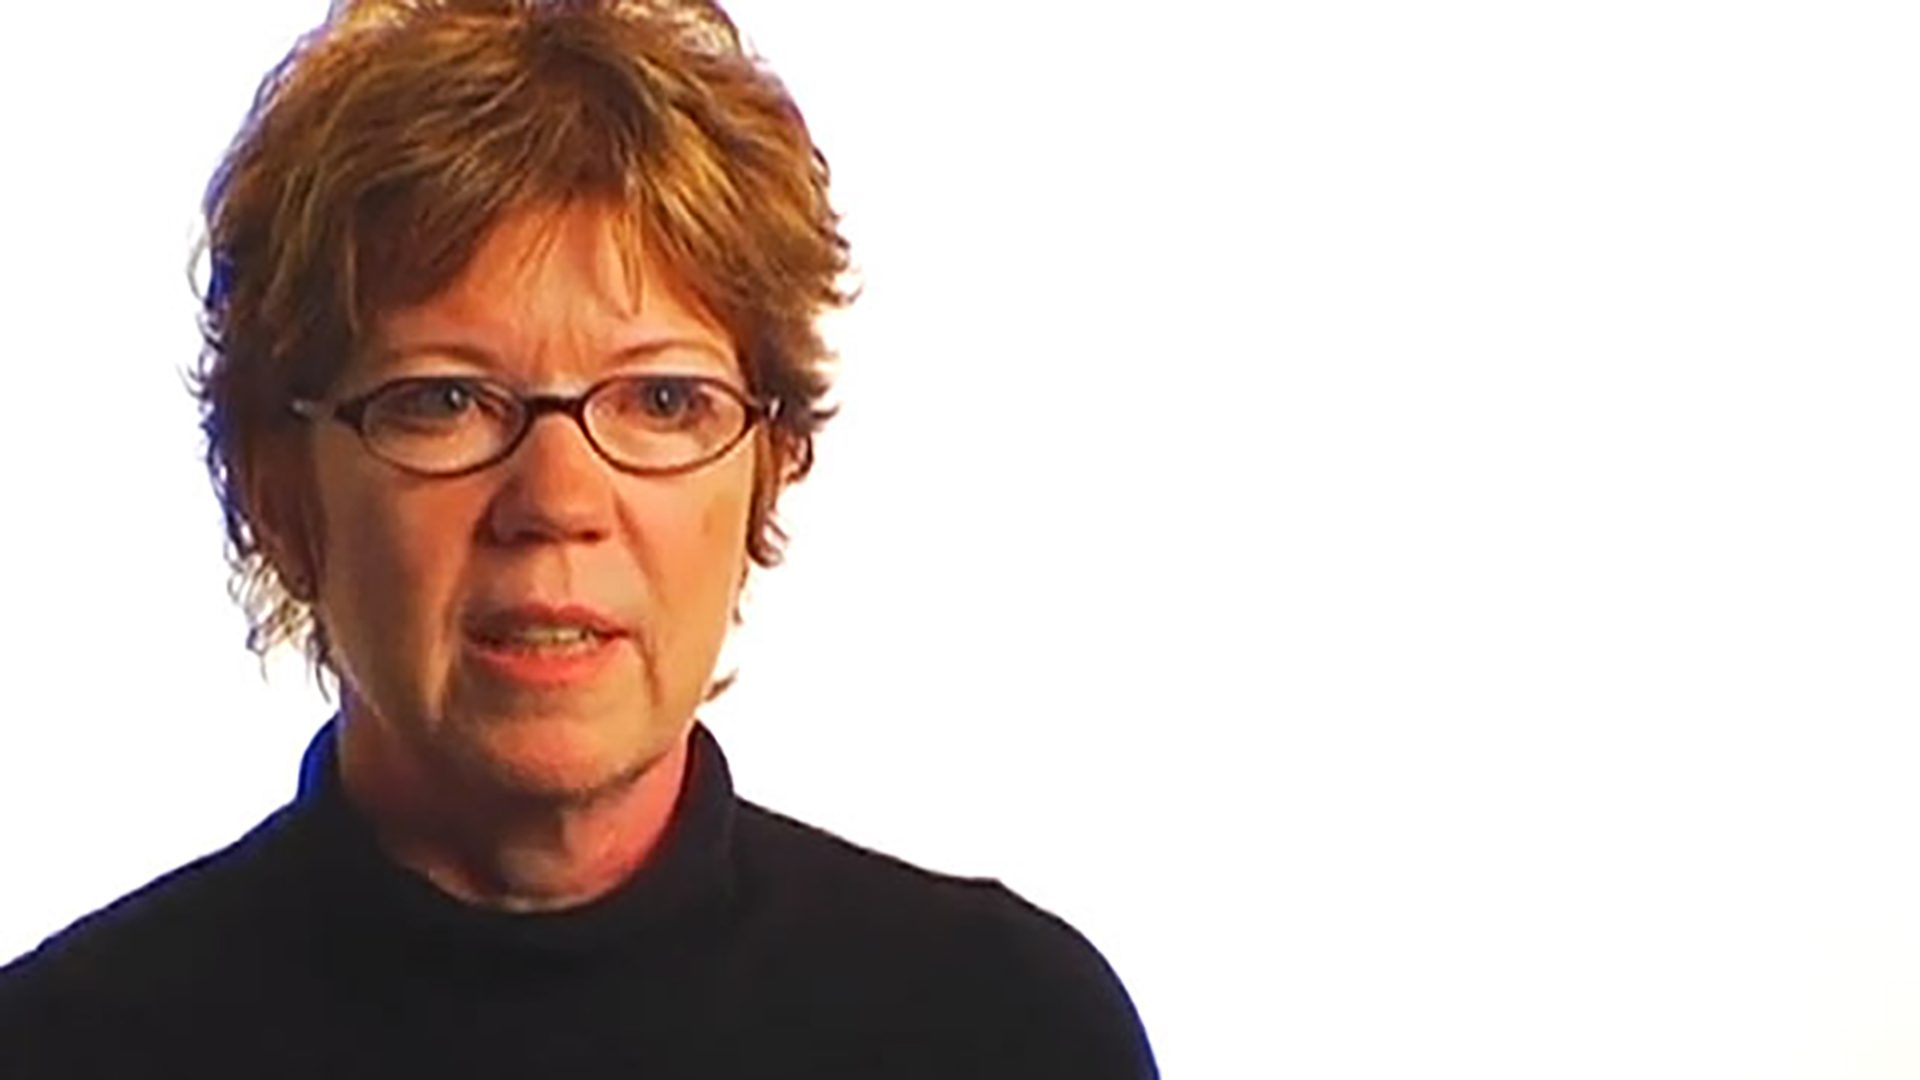 A middle-aged woman with red hair, glasses, and a black turtleneck is interviewed against a white background.